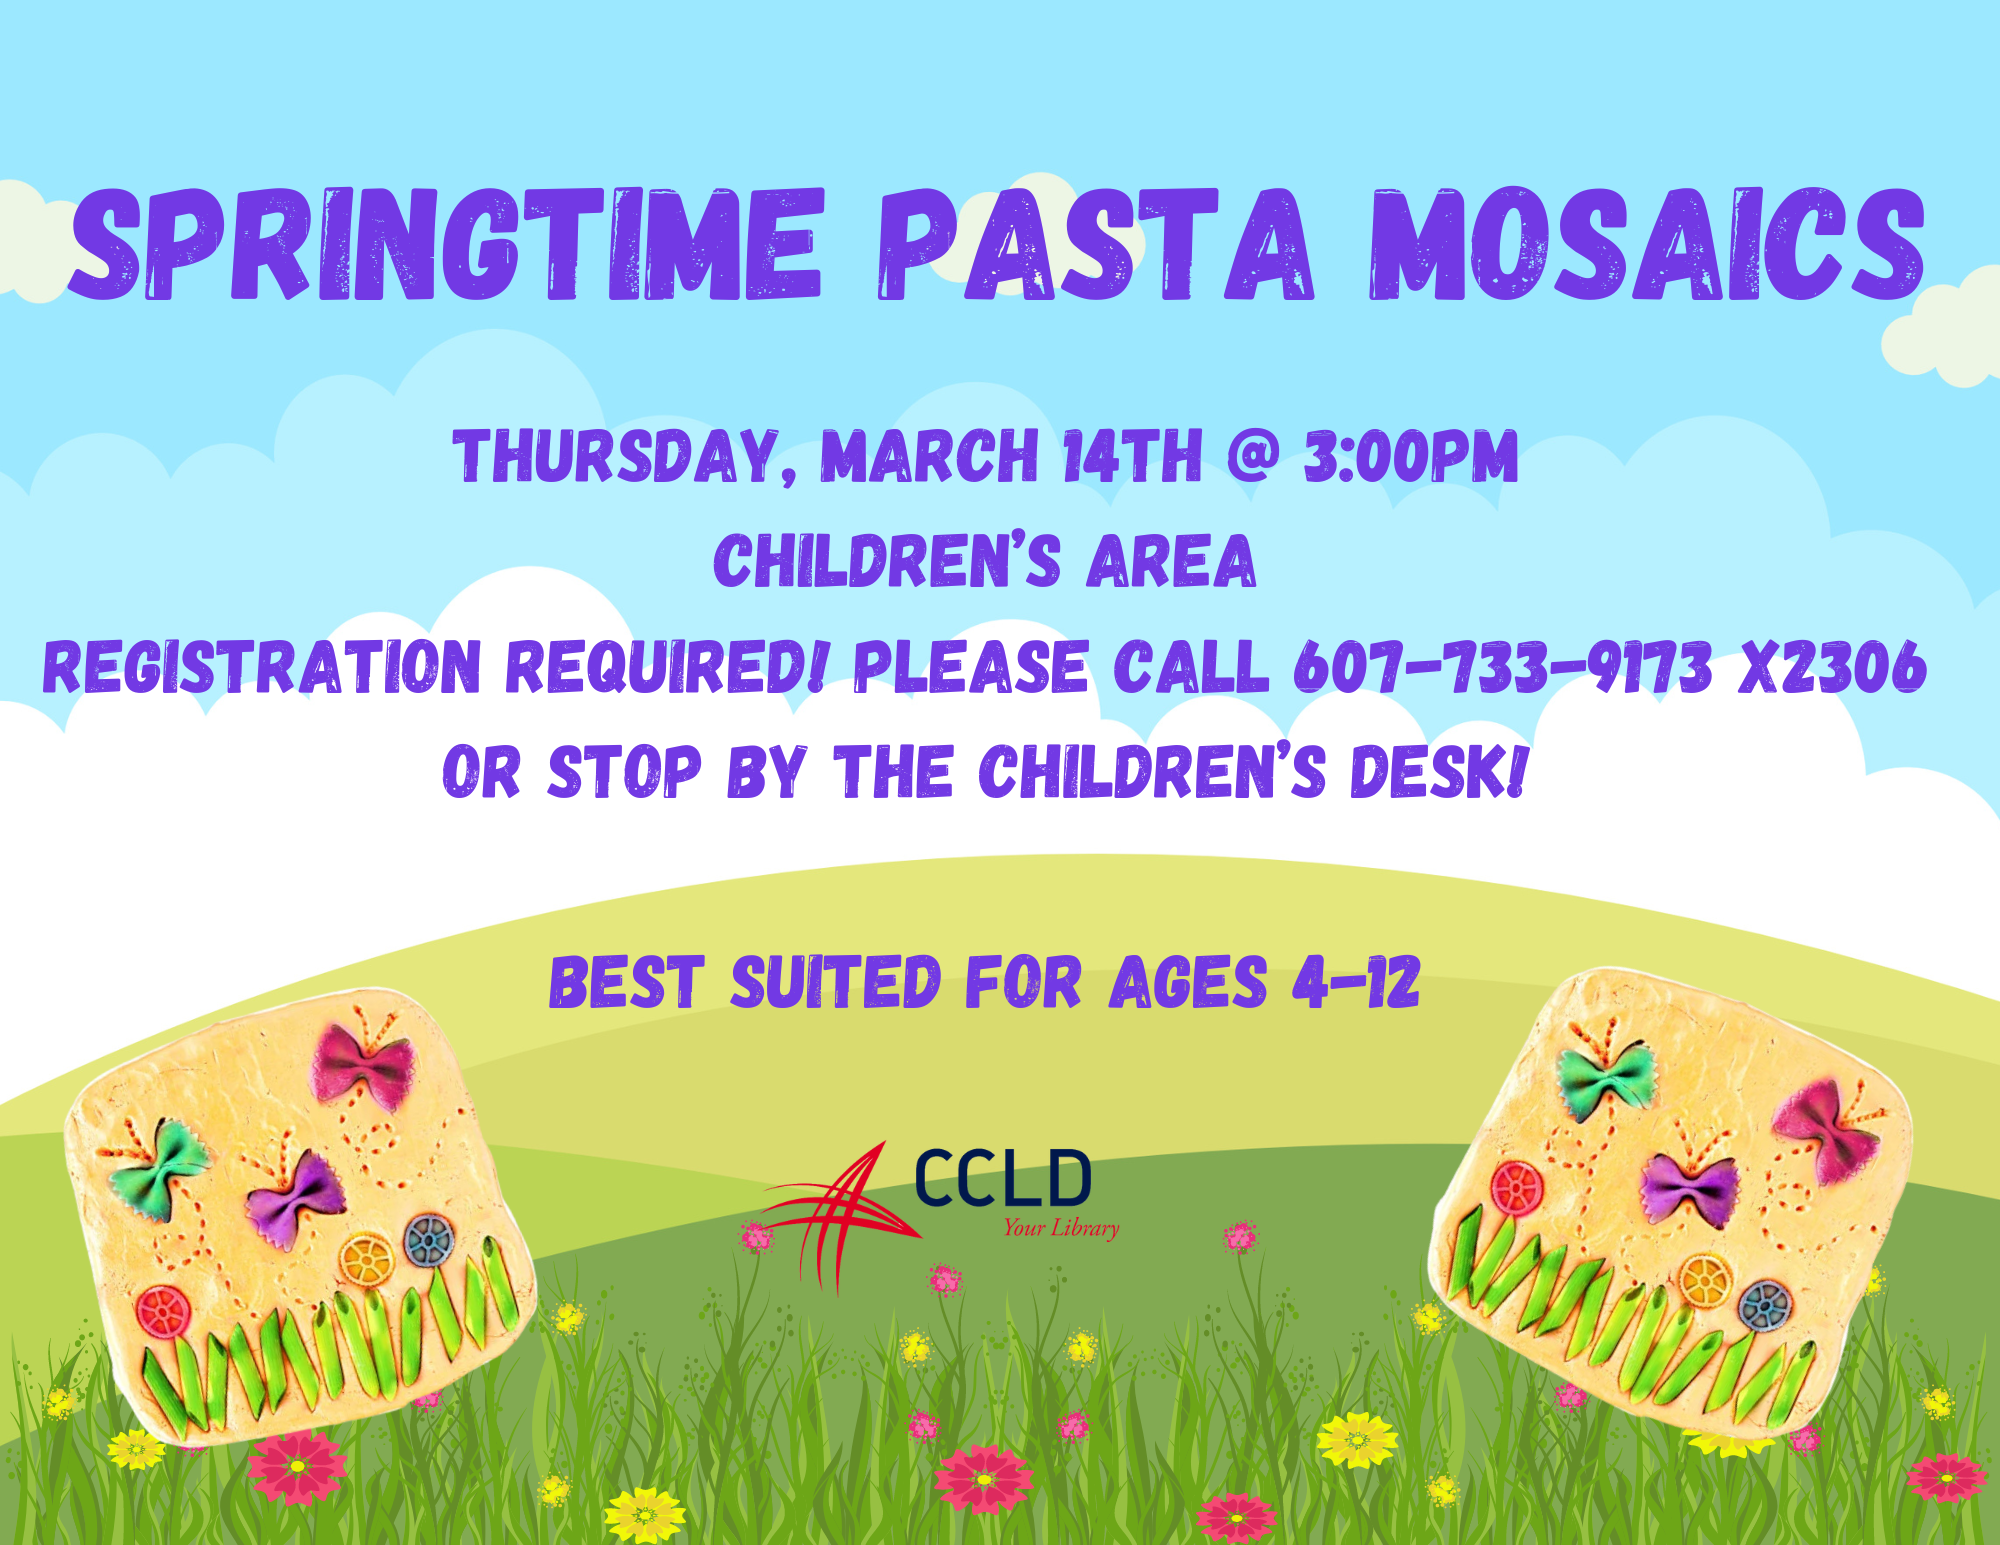 Spring is just around the corner! We are making mosaics with pasta and clay! Join us on March 14th from 3-4:30pm.

Registration is Required! Please call 607-733-9173 x2306, or stop by the Children's desk to register!